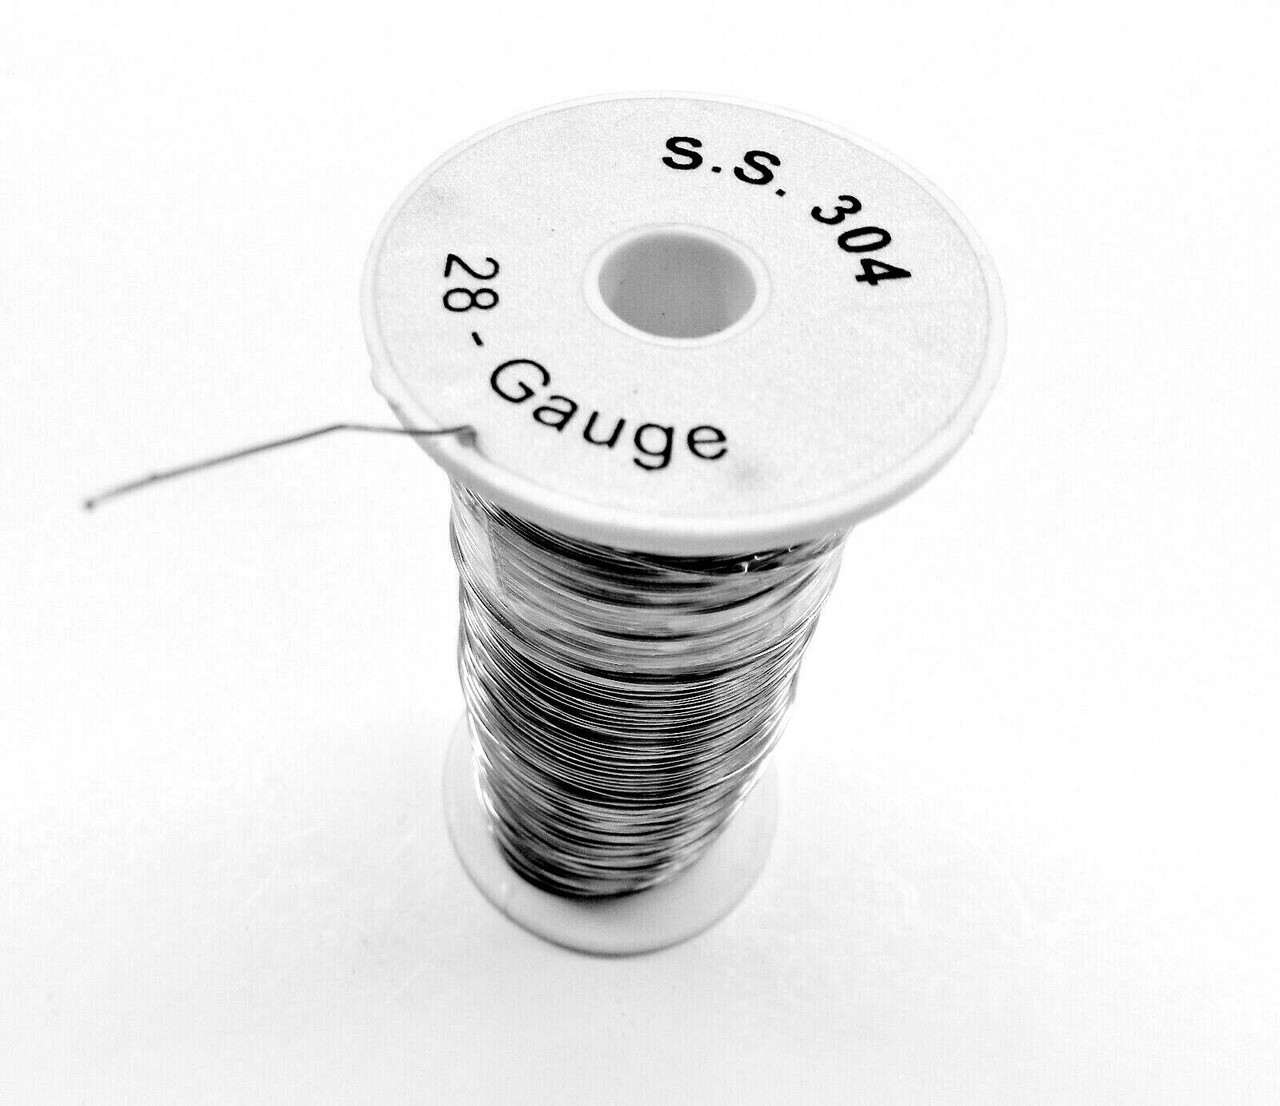 24ga Stainless Steel Wire Dead Soft Binding Wire Soldering 1/2lb Jewelry  Making